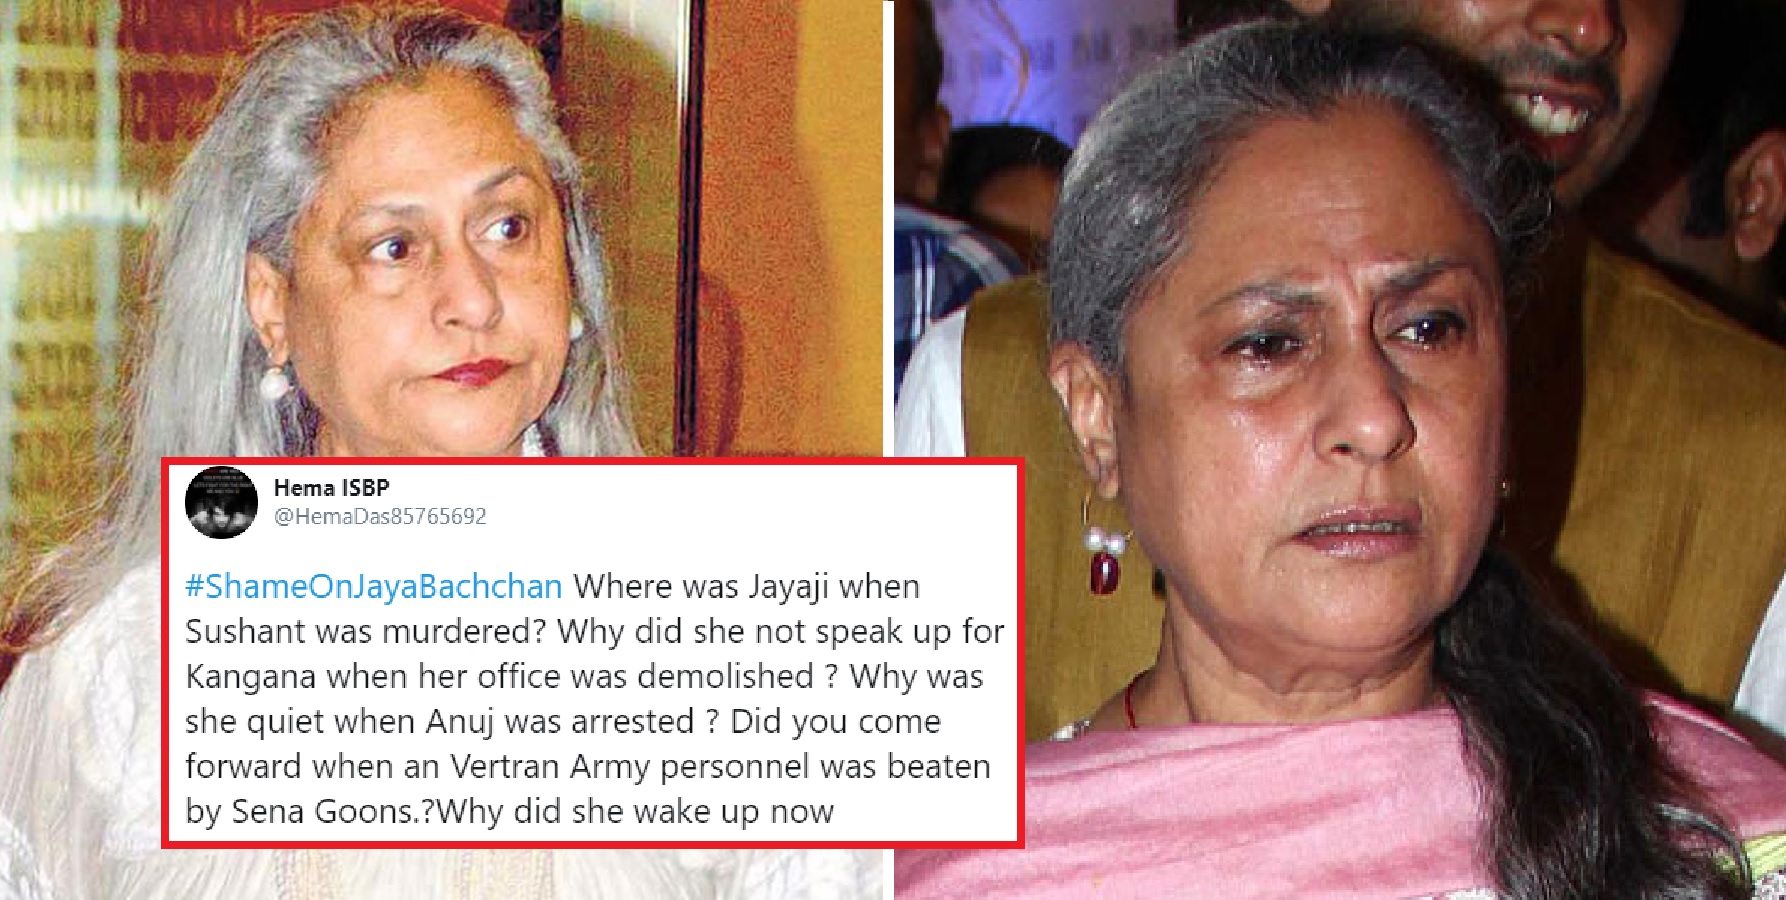 #ShameOnJayaBachchan Trends On Twitter, After She Expresses Anger With Those Criticising Bollywood